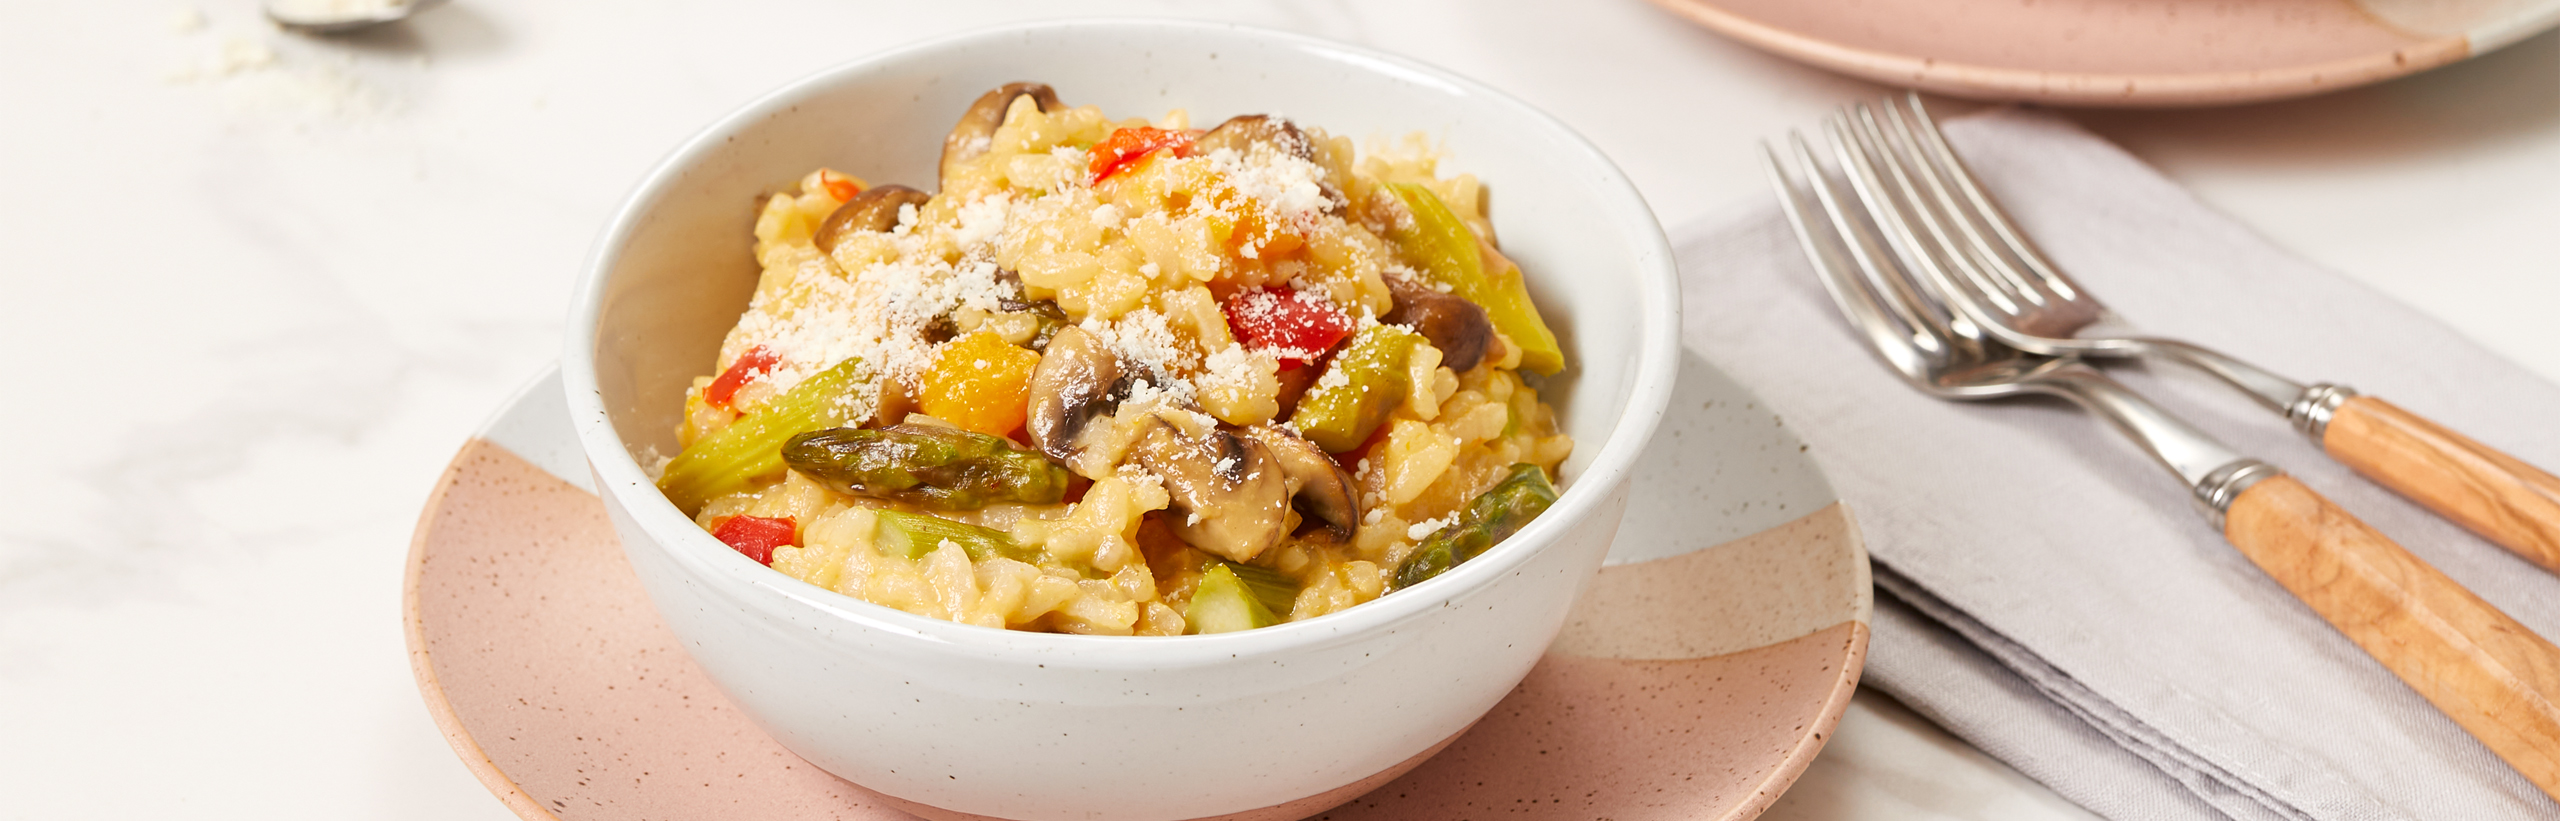 https://www.campbells.com/swanson/wp-content/uploads/2020/10/Vegetable-risotto.jpg